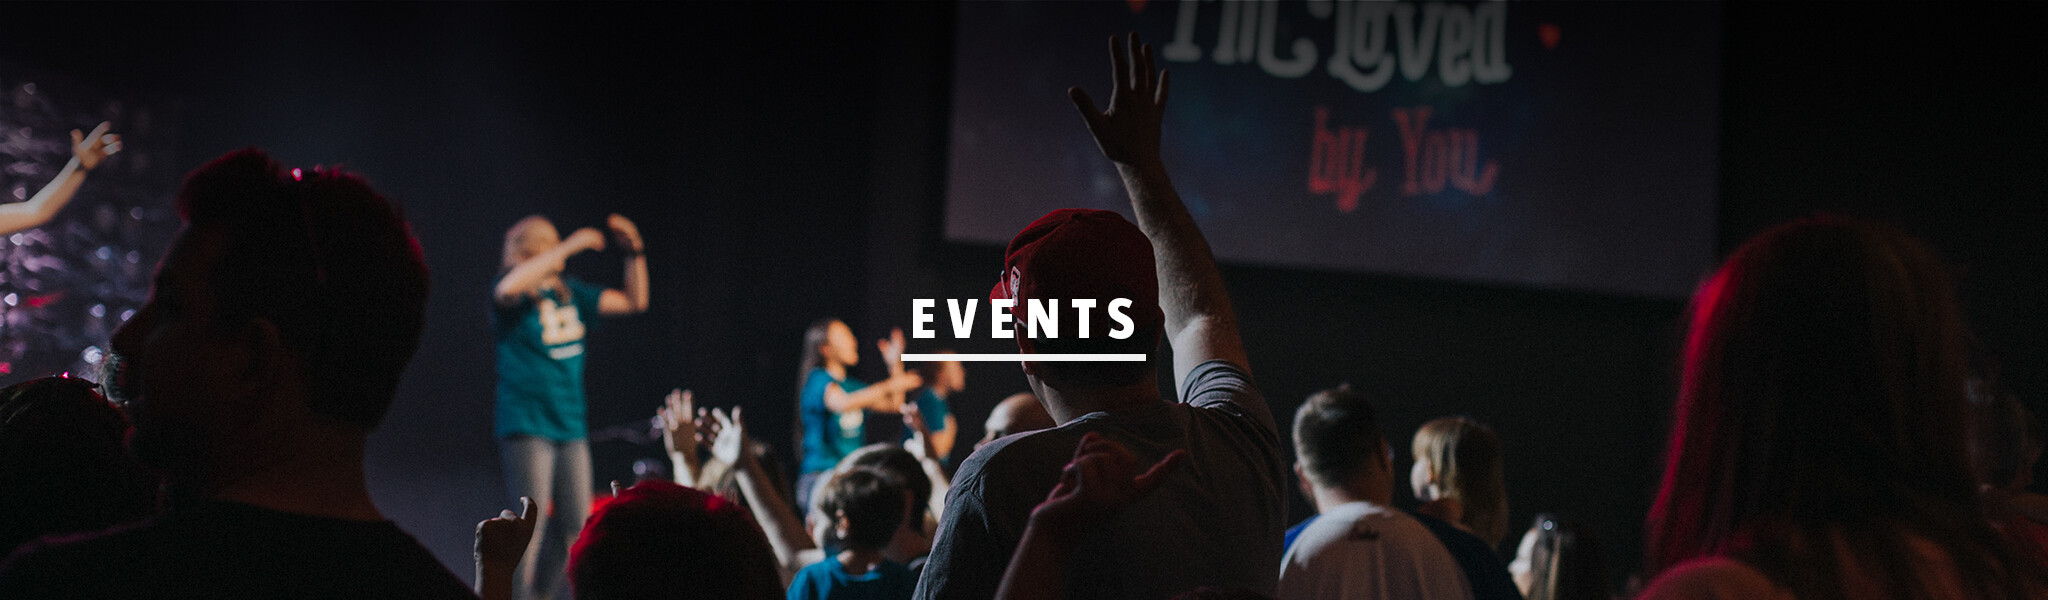 CP Connect is an experience to help you make the most of what we offer to help you connect with Jesus and others. This is your opportunity to learn more about what we at Connection Pointe believe, what our purpose is and what it means to be a...